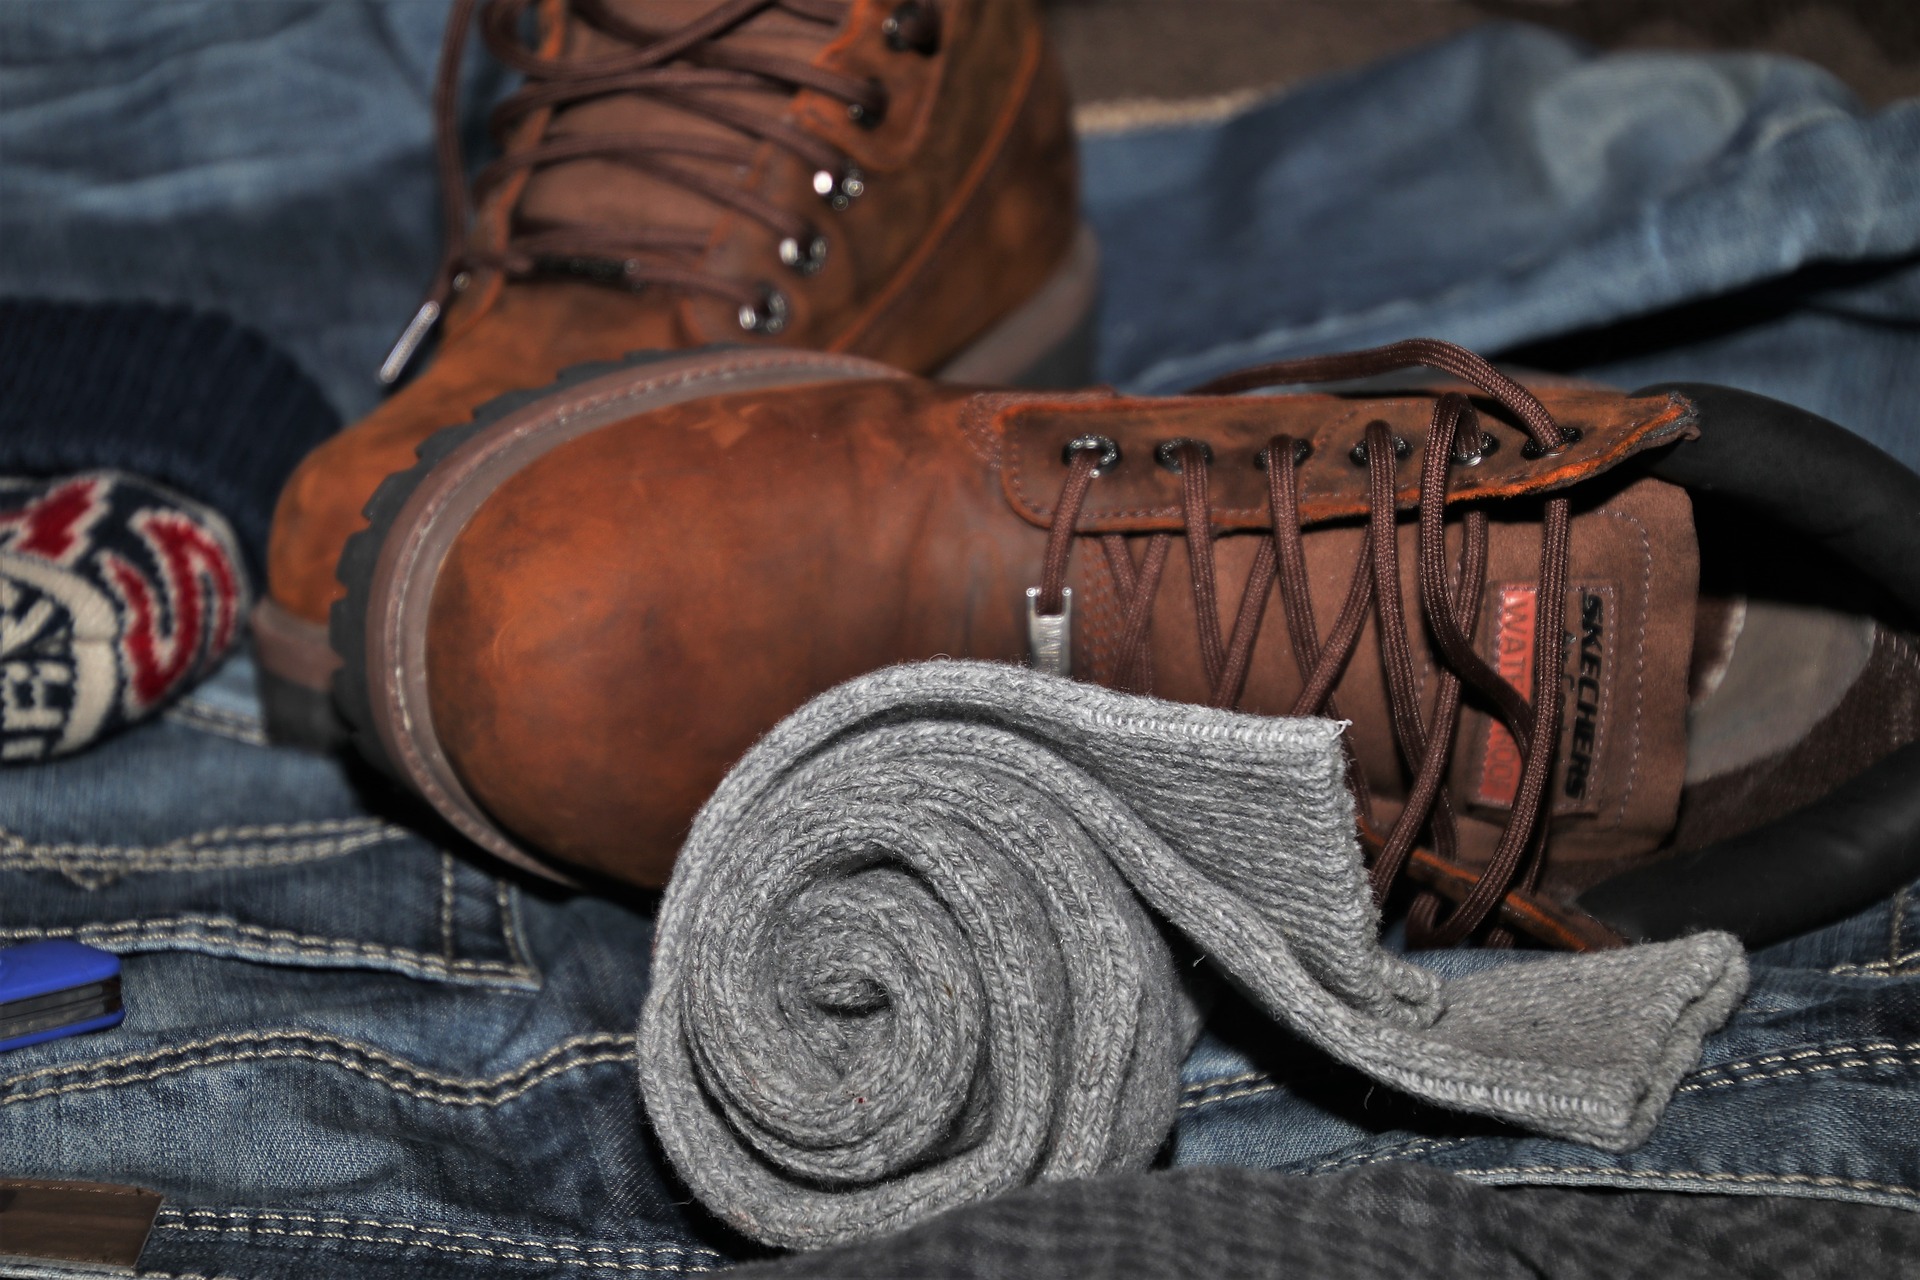 Suitcase close-up with rolled socks and hiking boots (source: pasja1000, Pixabay)